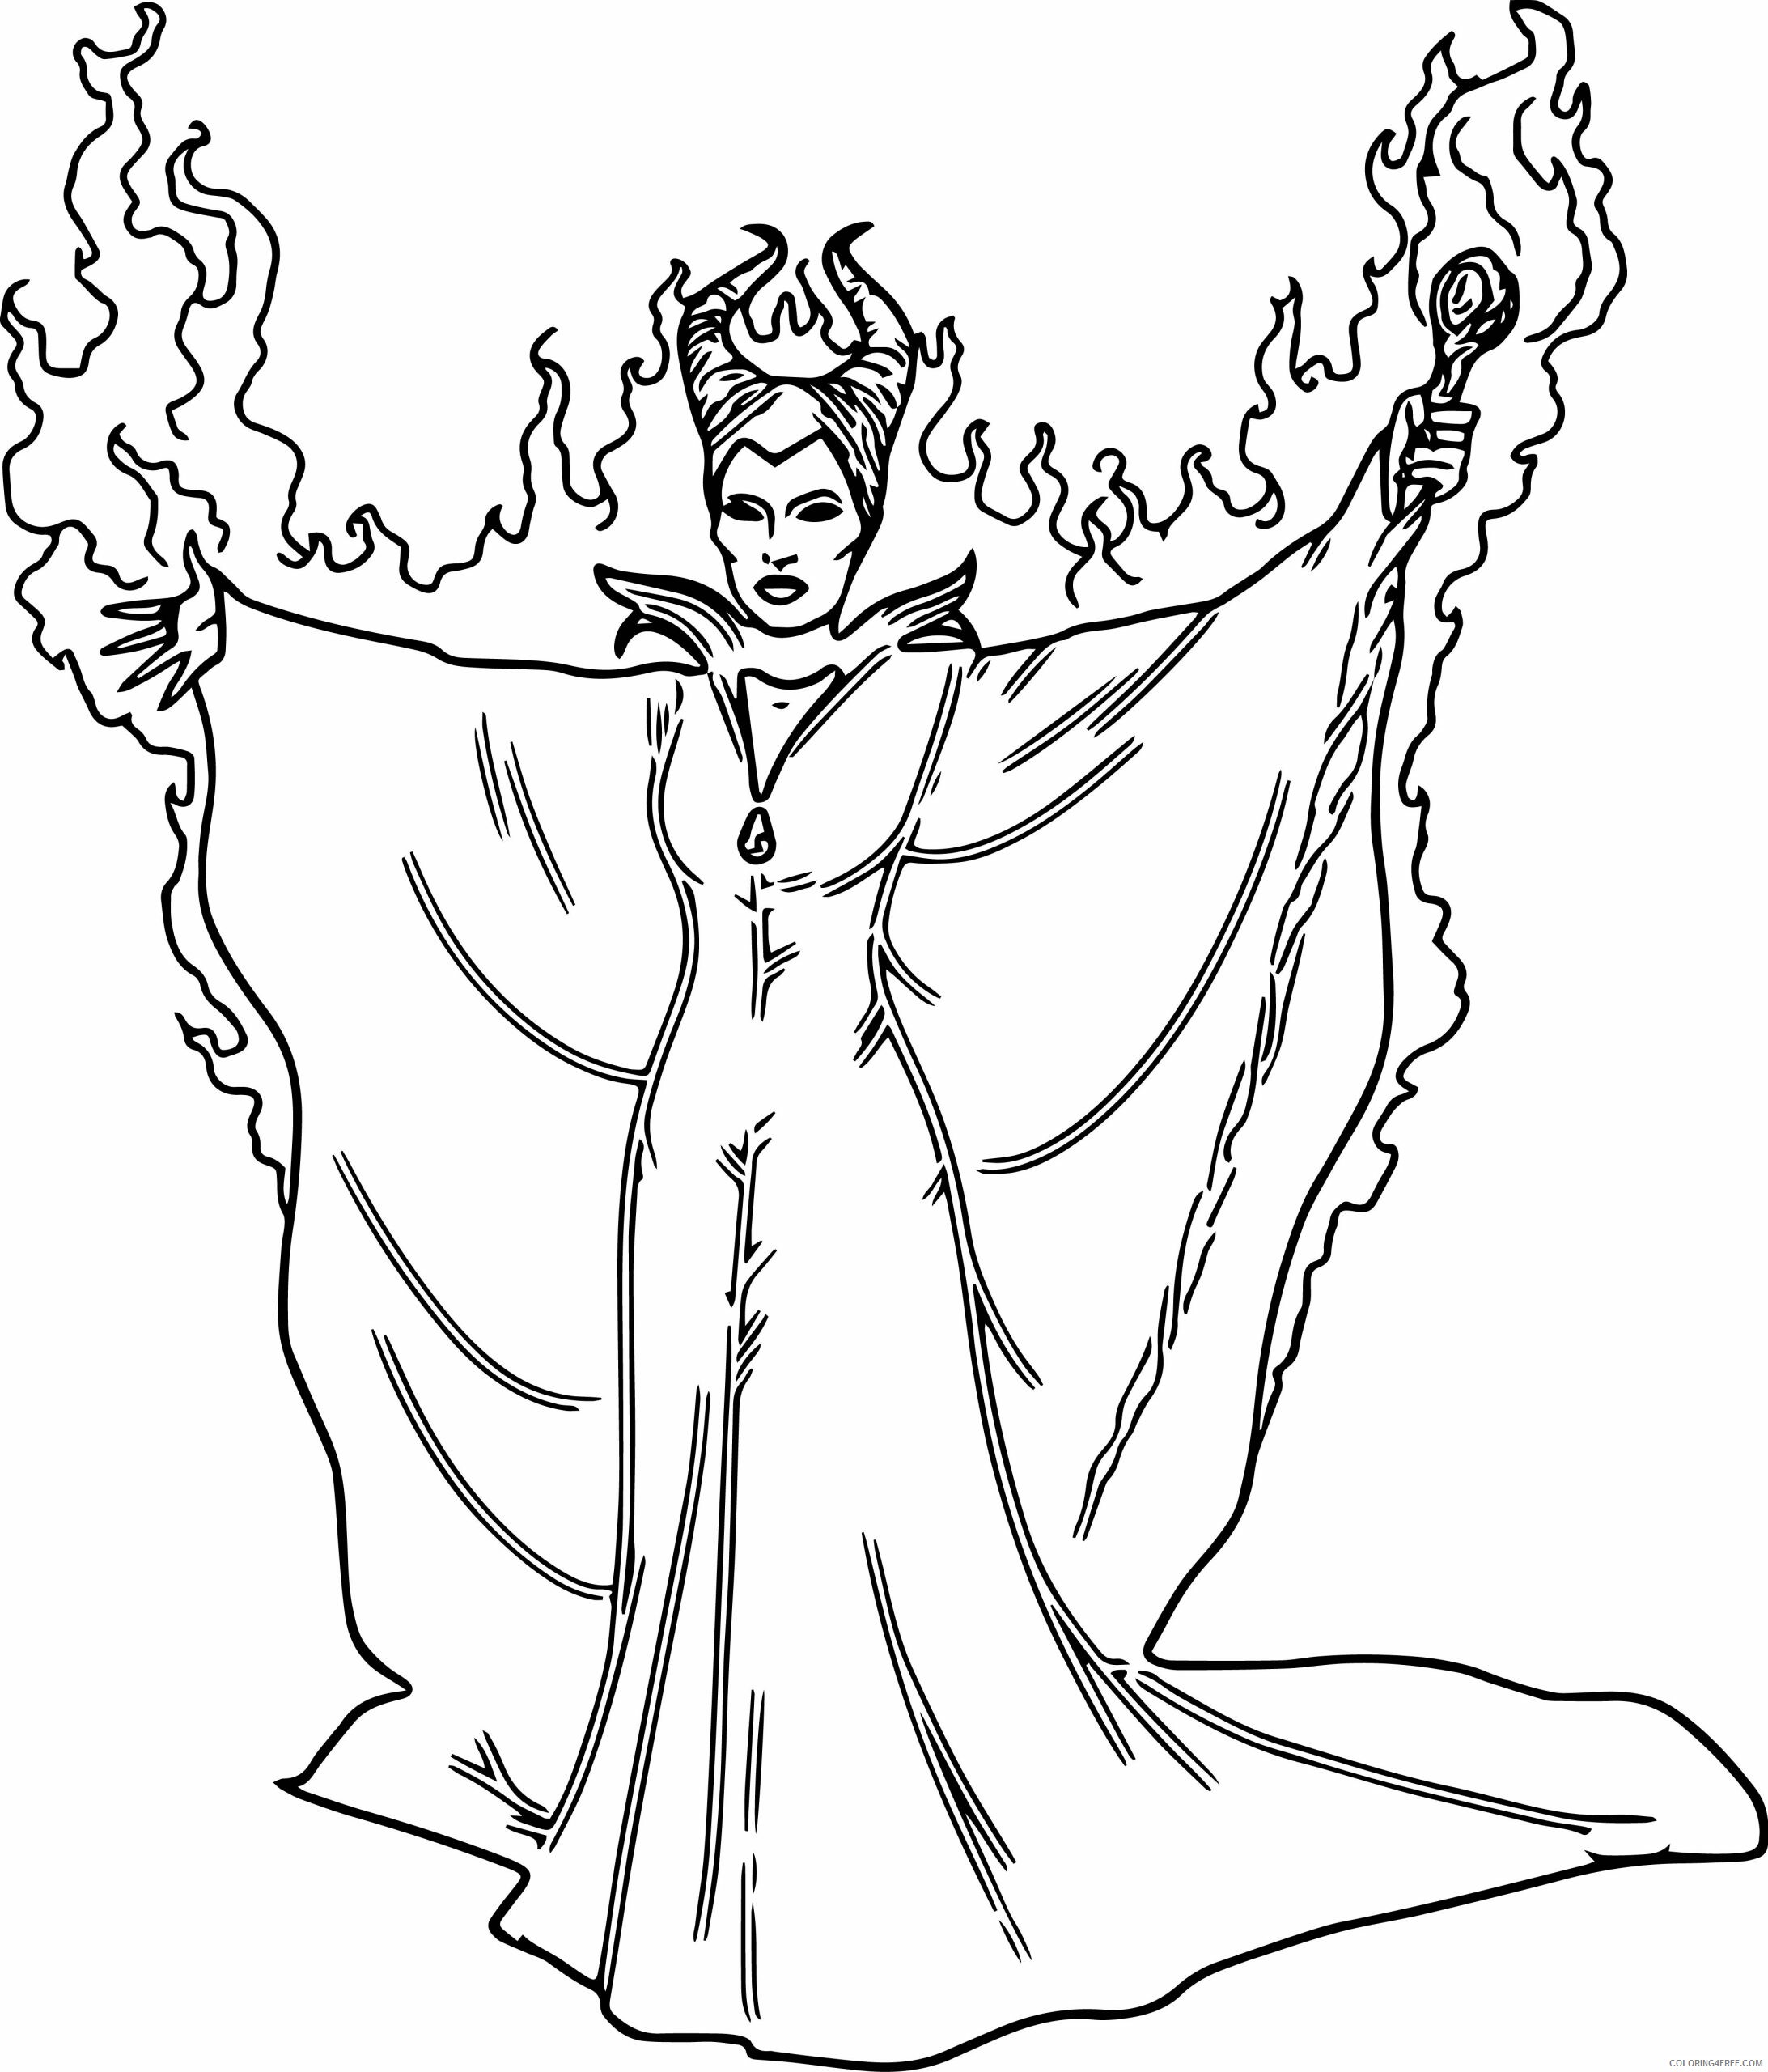 Maleficent Coloring Pages TV Film Fiery Maleficent scaled Printable 2020 04822 Coloring4free